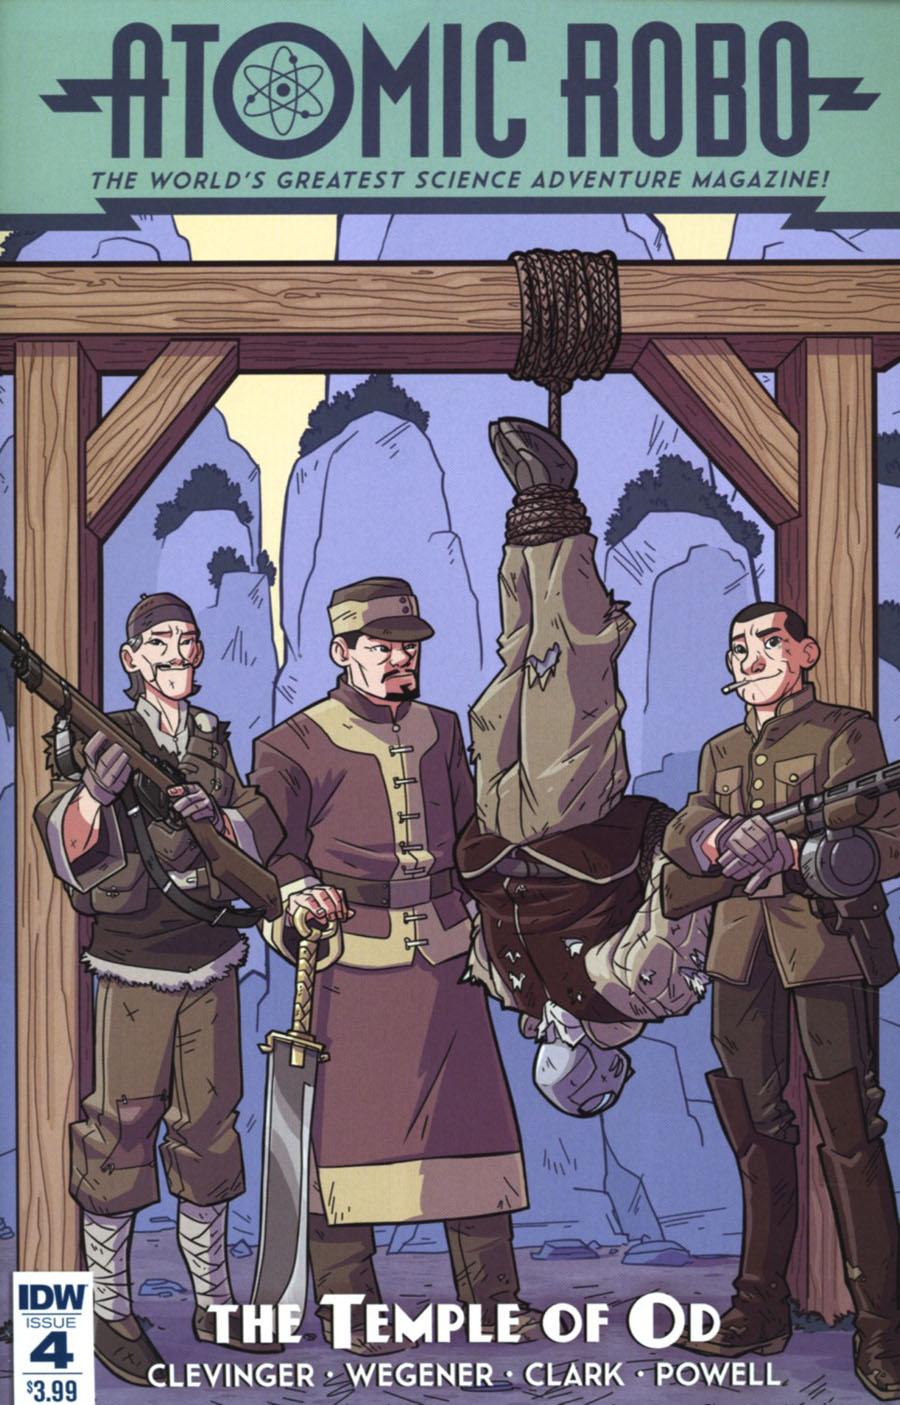 Atomic Robo And The Temple Of Od Vol. 1 #4